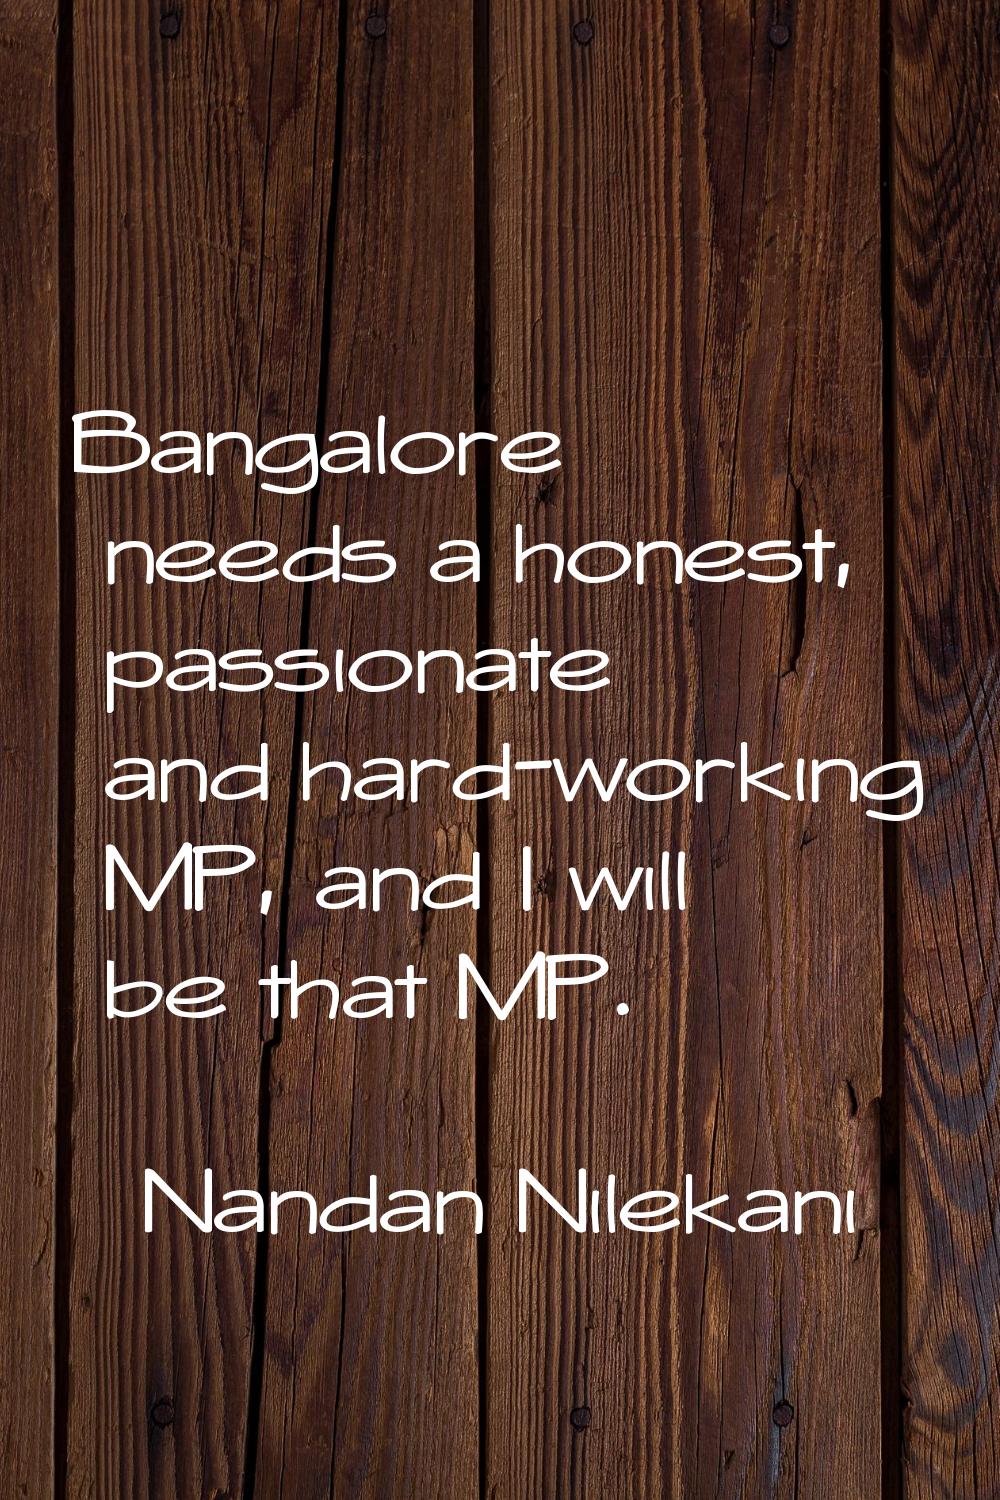 Bangalore needs a honest, passionate and hard-working MP, and I will be that MP.